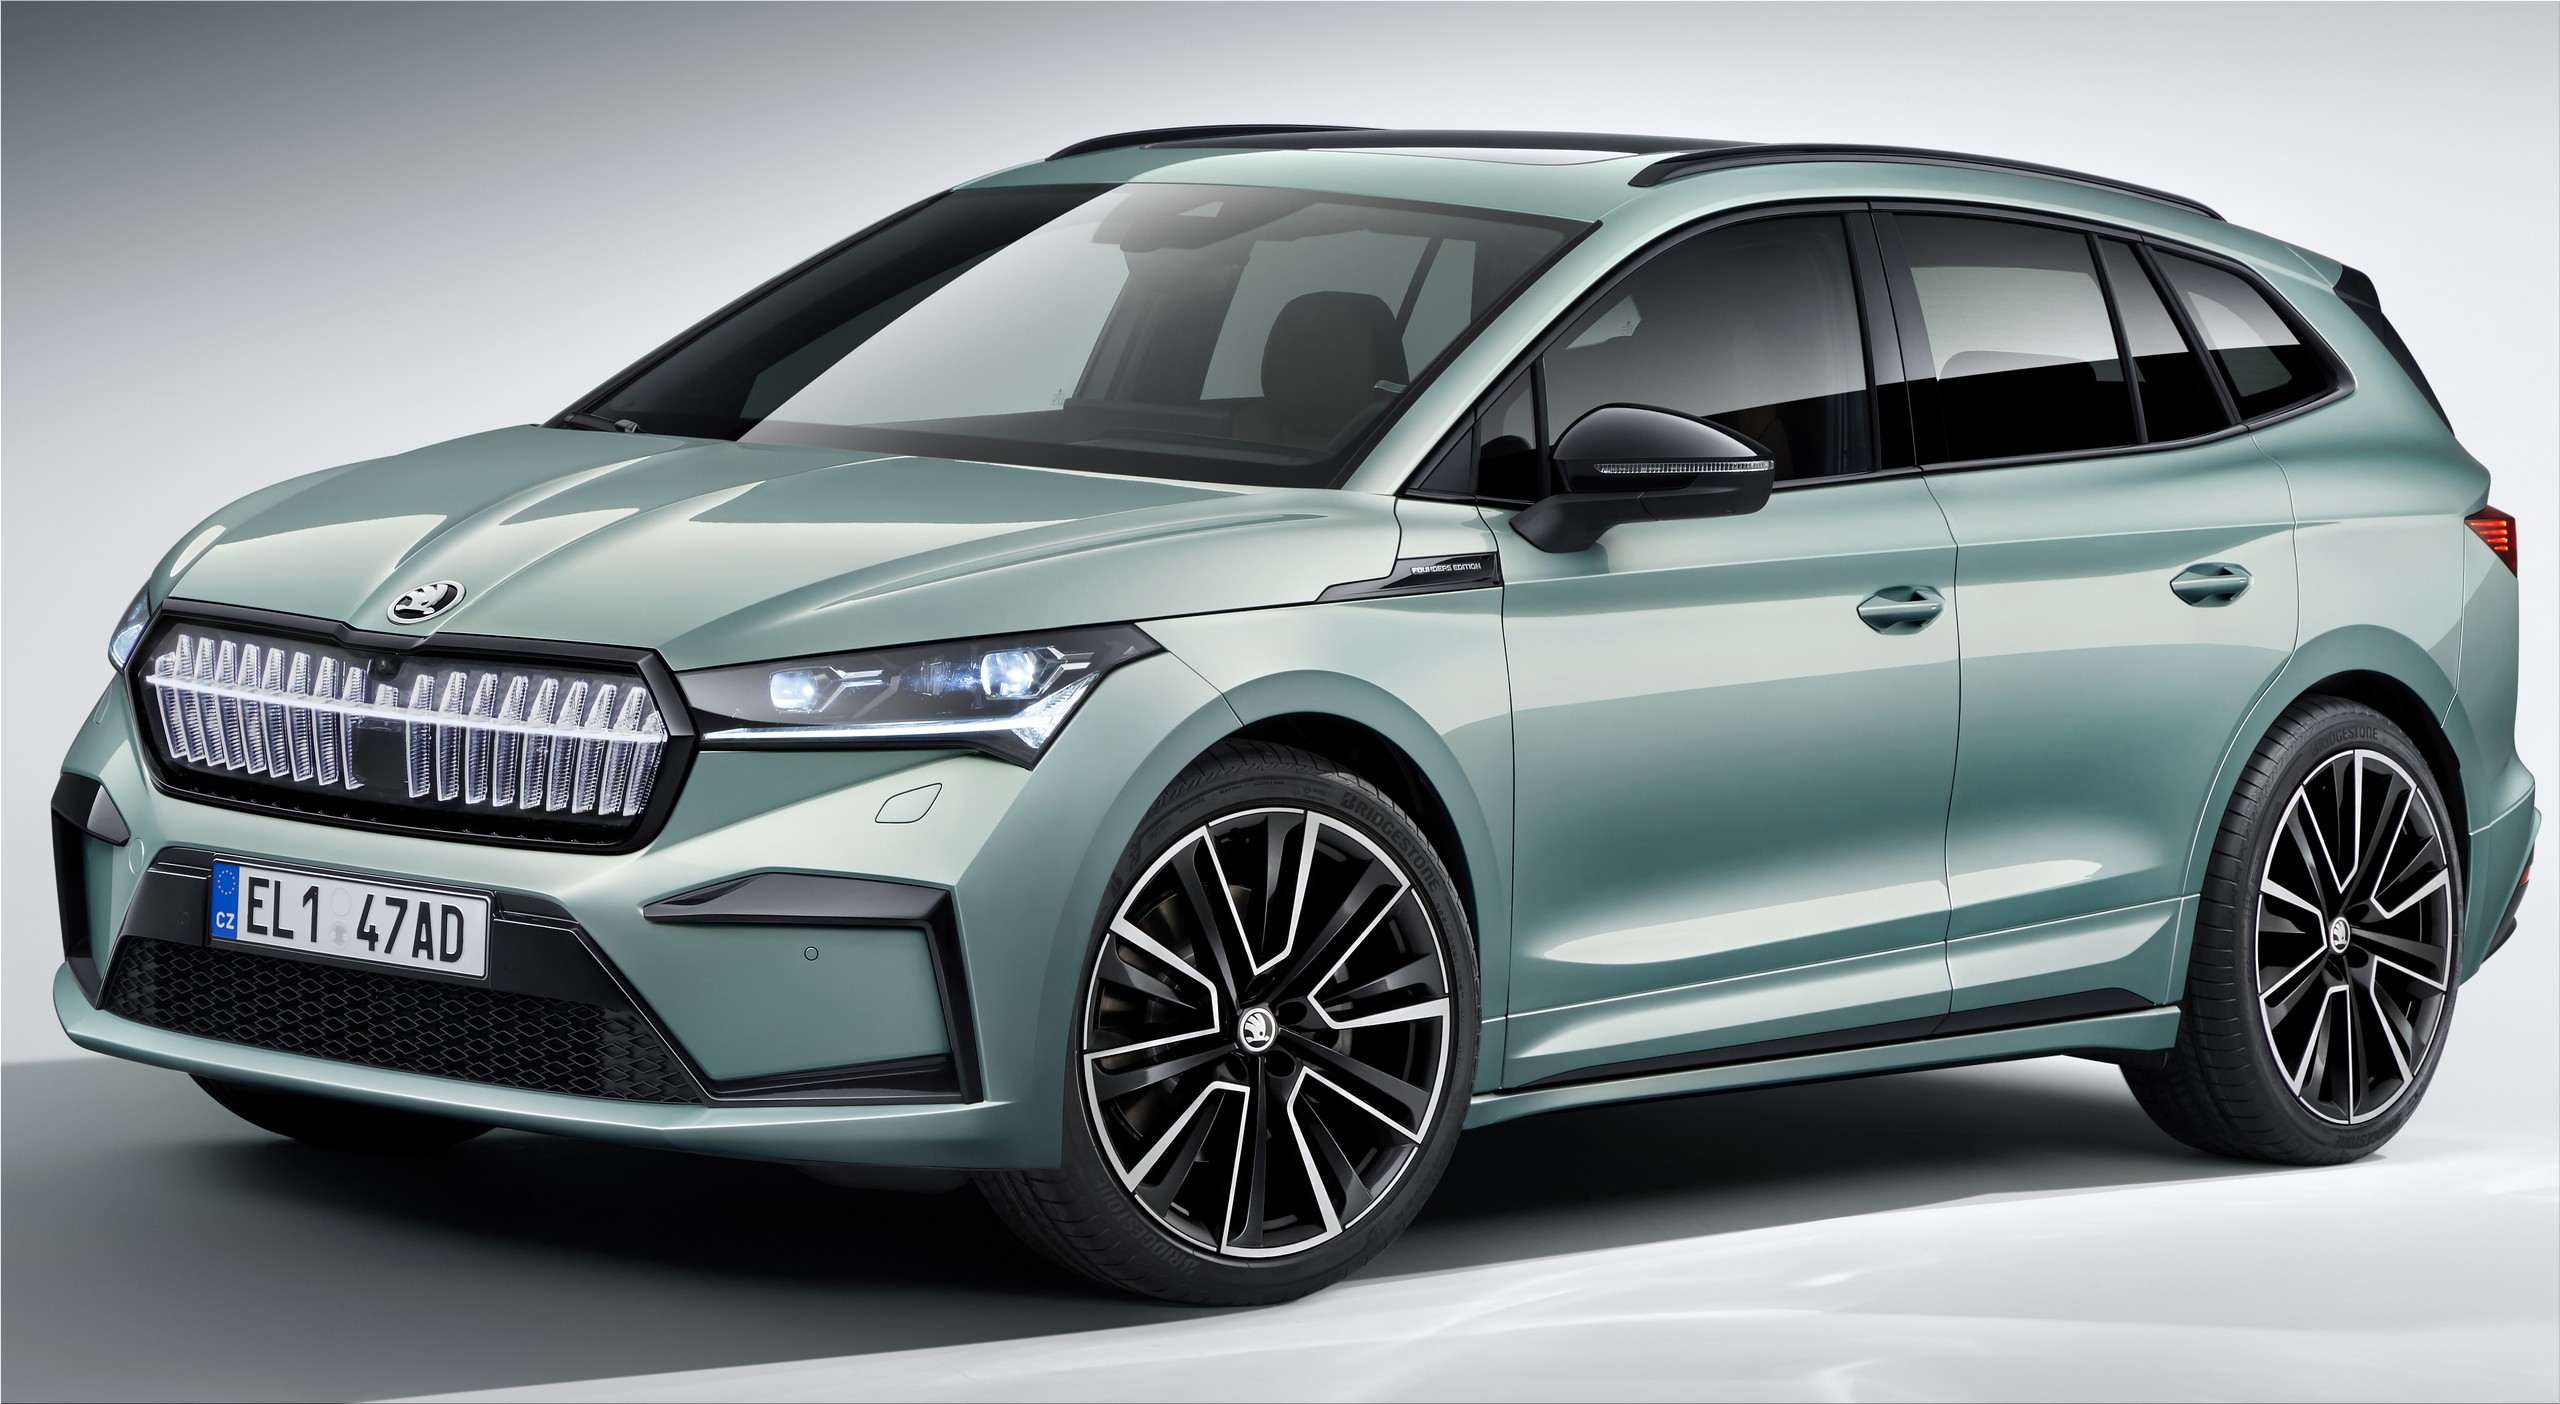 Skoda Enyaq iV is the first 100% electric SUV of the Czech brand